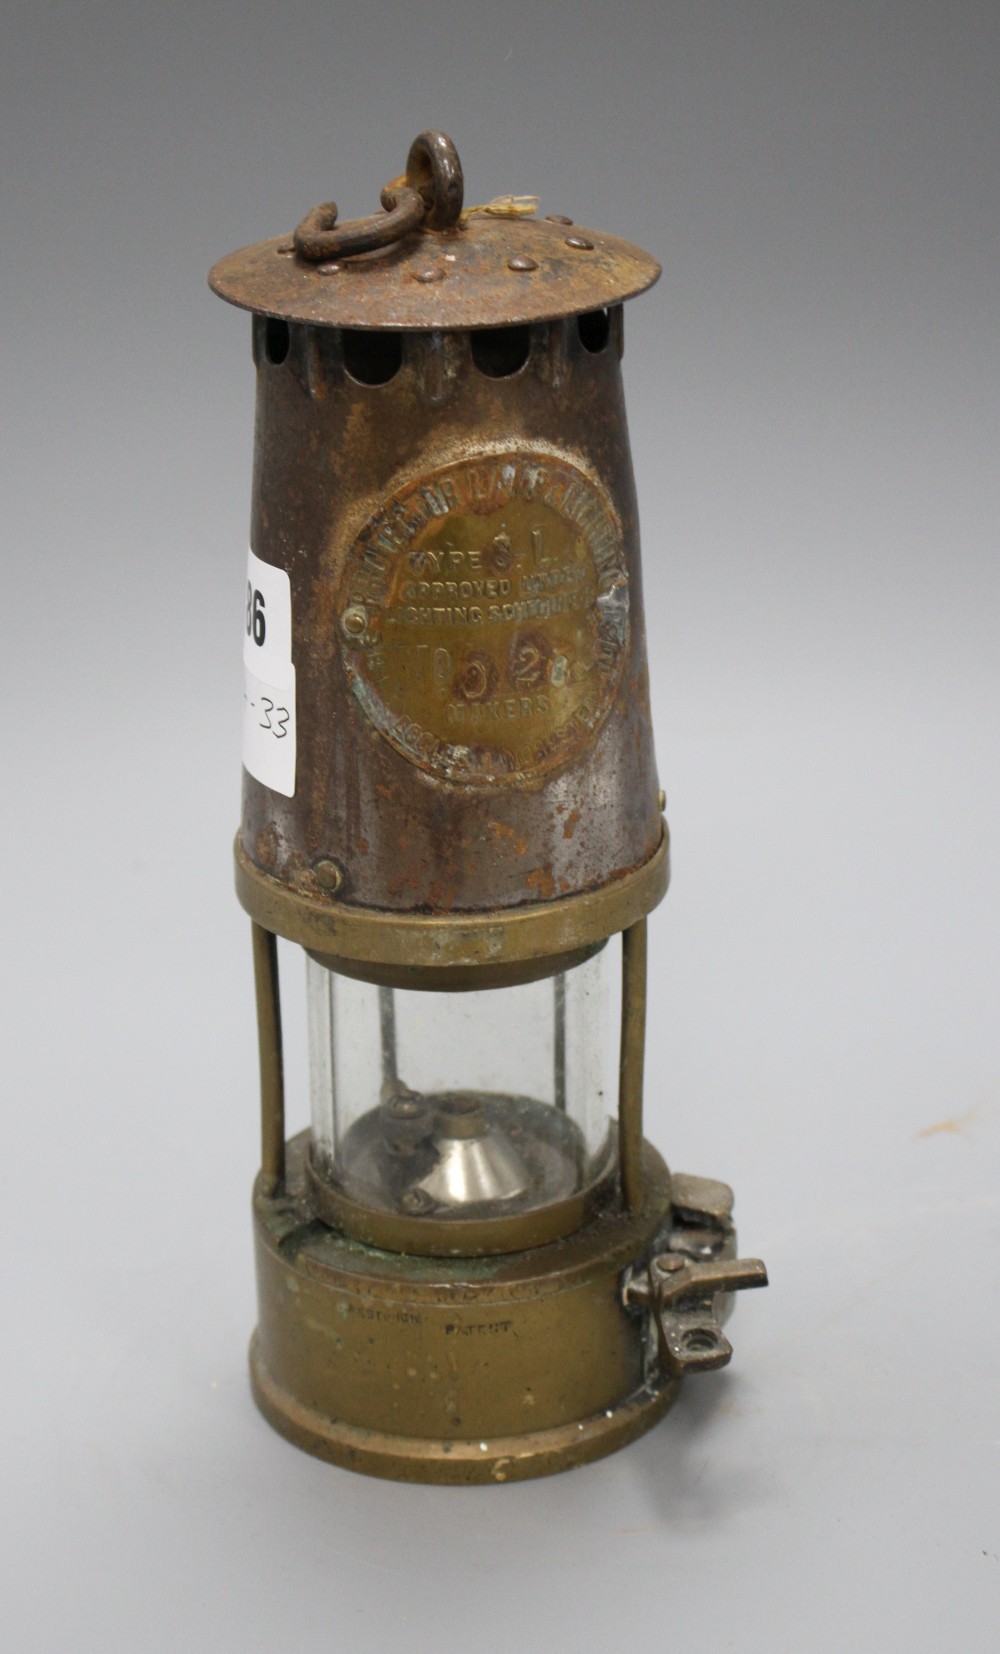 The Protector Lamp and Lighting Co Limited miners lamp, type S-L number 02926?, height 24.5cm